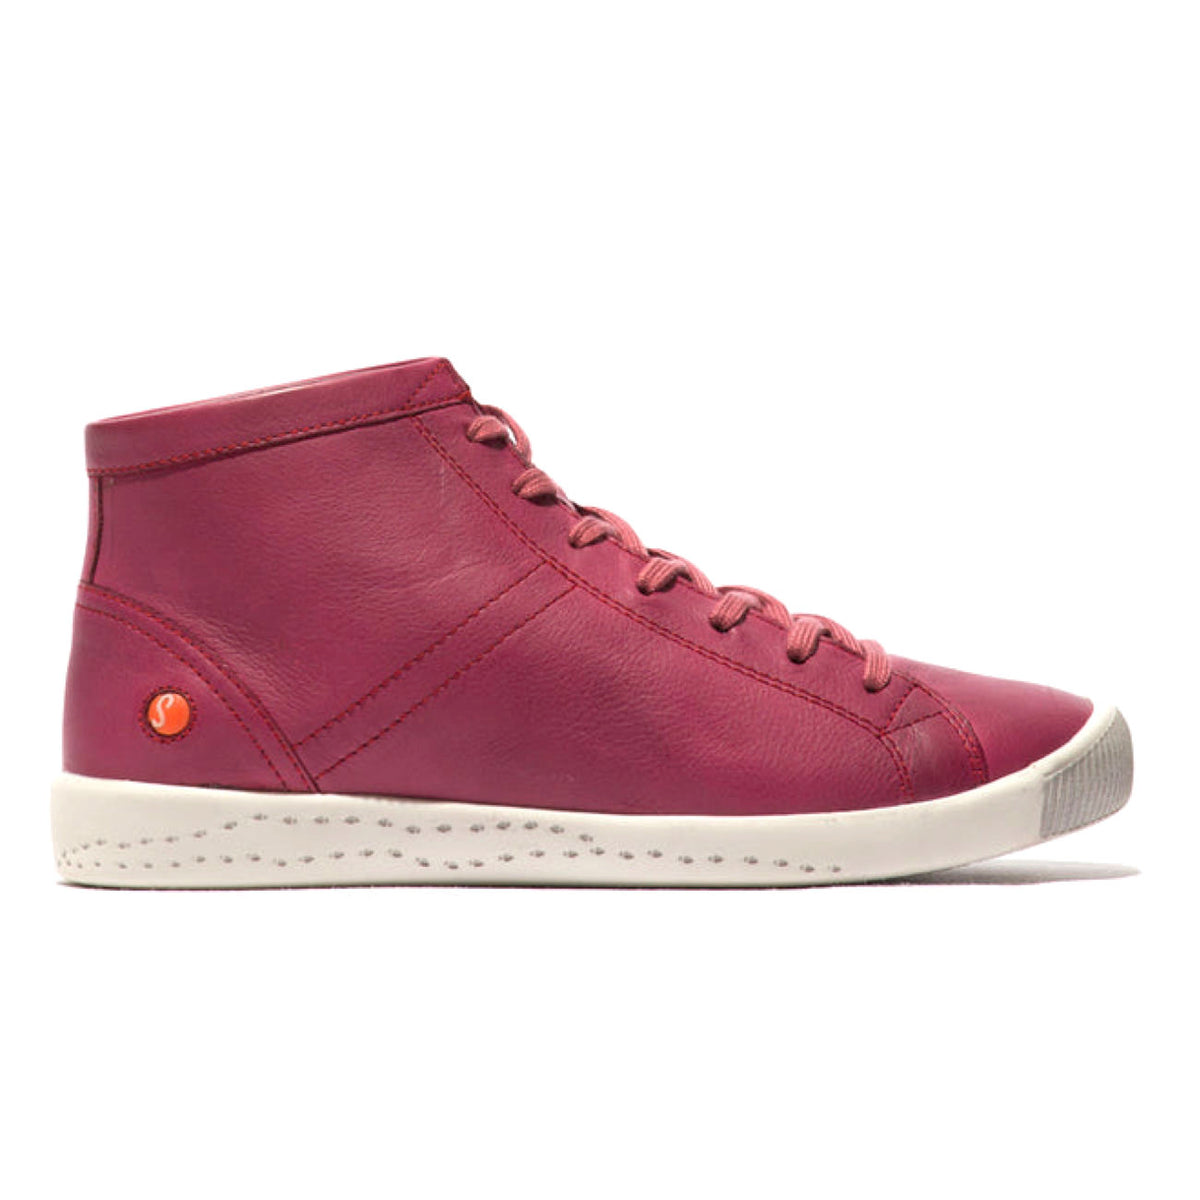 Softinos, Isleen268, Laceup Shoe, Washed Leather, Dark Red